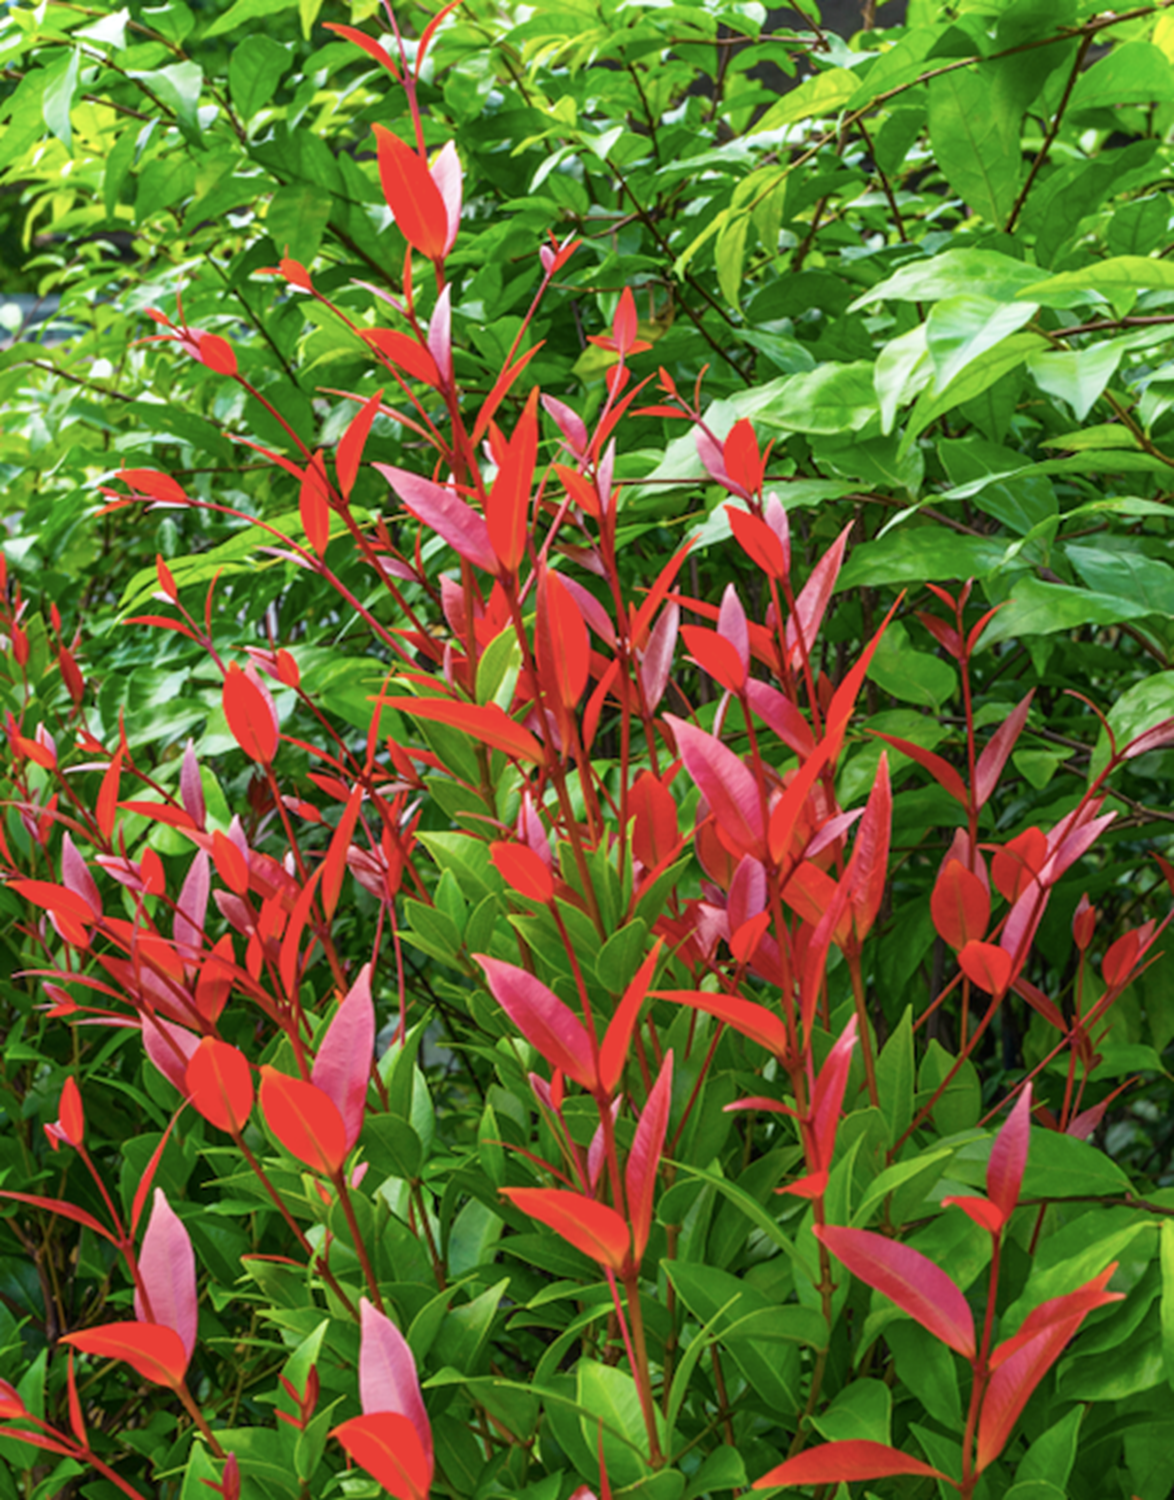 **Lillypillies** (*Syzygium smithii*): [Lillypilly trees](https://www.homestolove.com.au/lillypilly-9623|target="_blank") have plenty of glossy foliage to dress up and can be clipped into any shape, from a tapered cone for Christmas or a round shape for the rest of the year. Their red and green leaves make them feel extra festive.